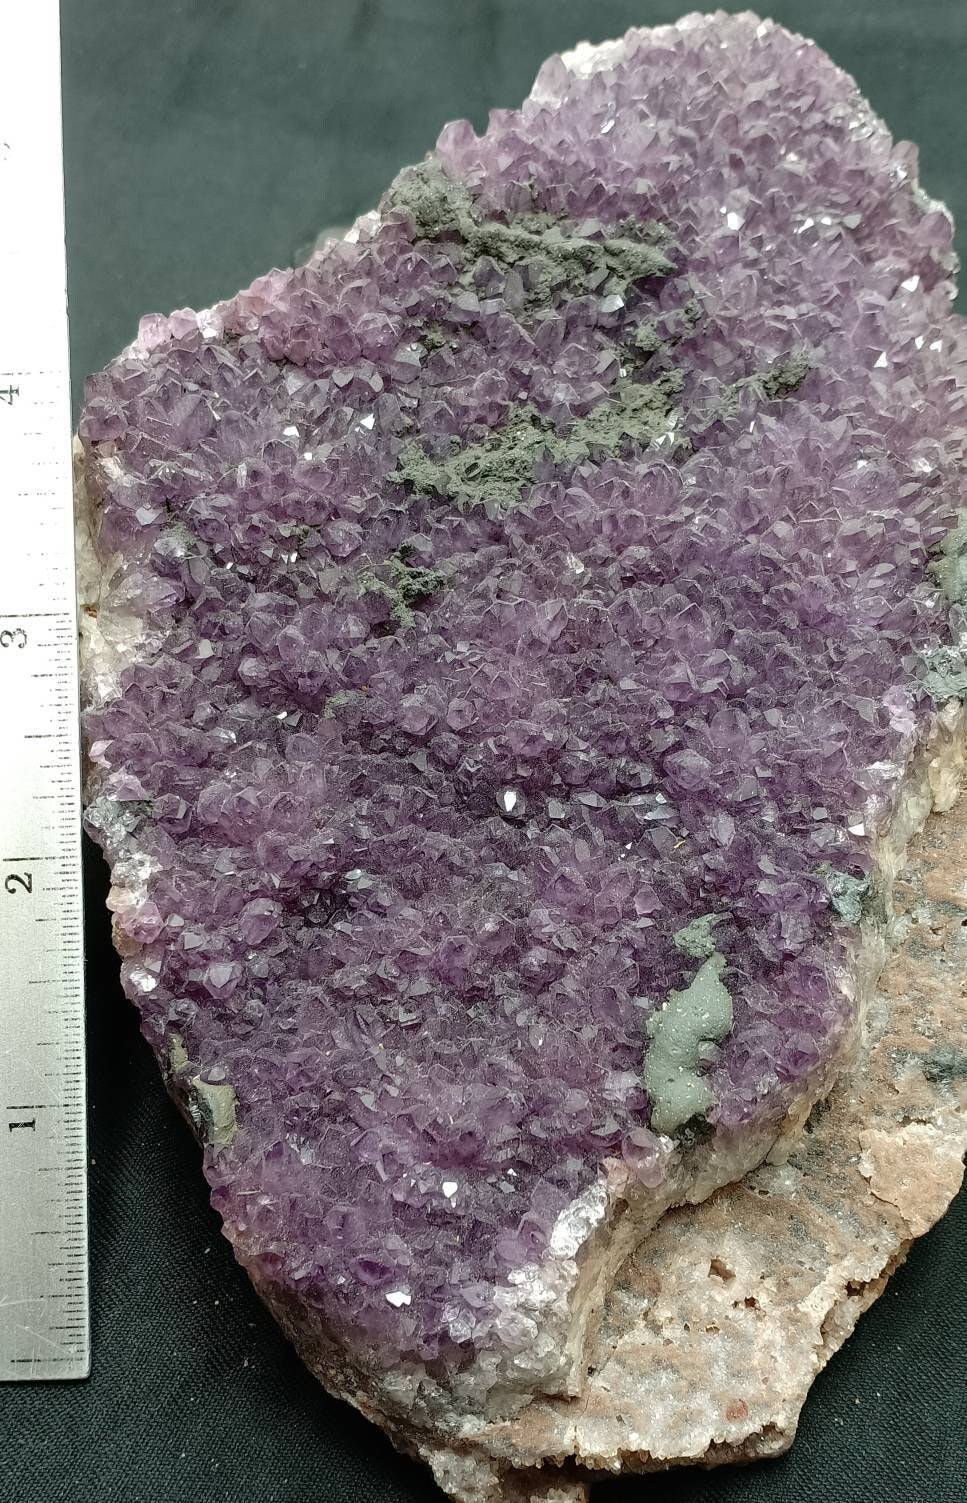 Single beautiful drusy Amethyst crystals Cluster plate 823 grams